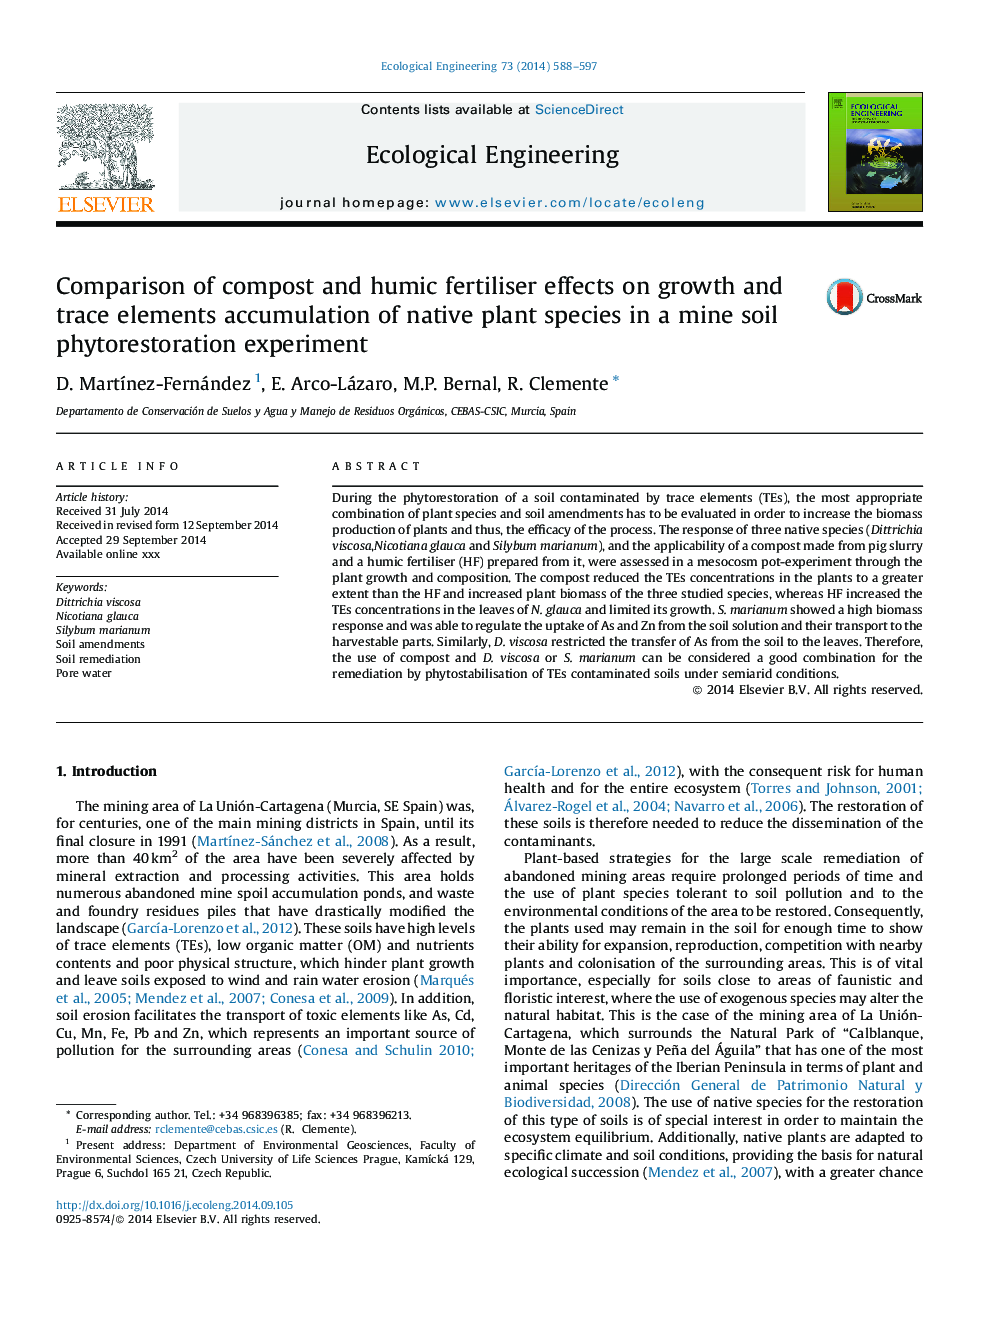 Comparison of compost and humic fertiliser effects on growth and trace elements accumulation of native plant species in a mine soil phytorestoration experiment